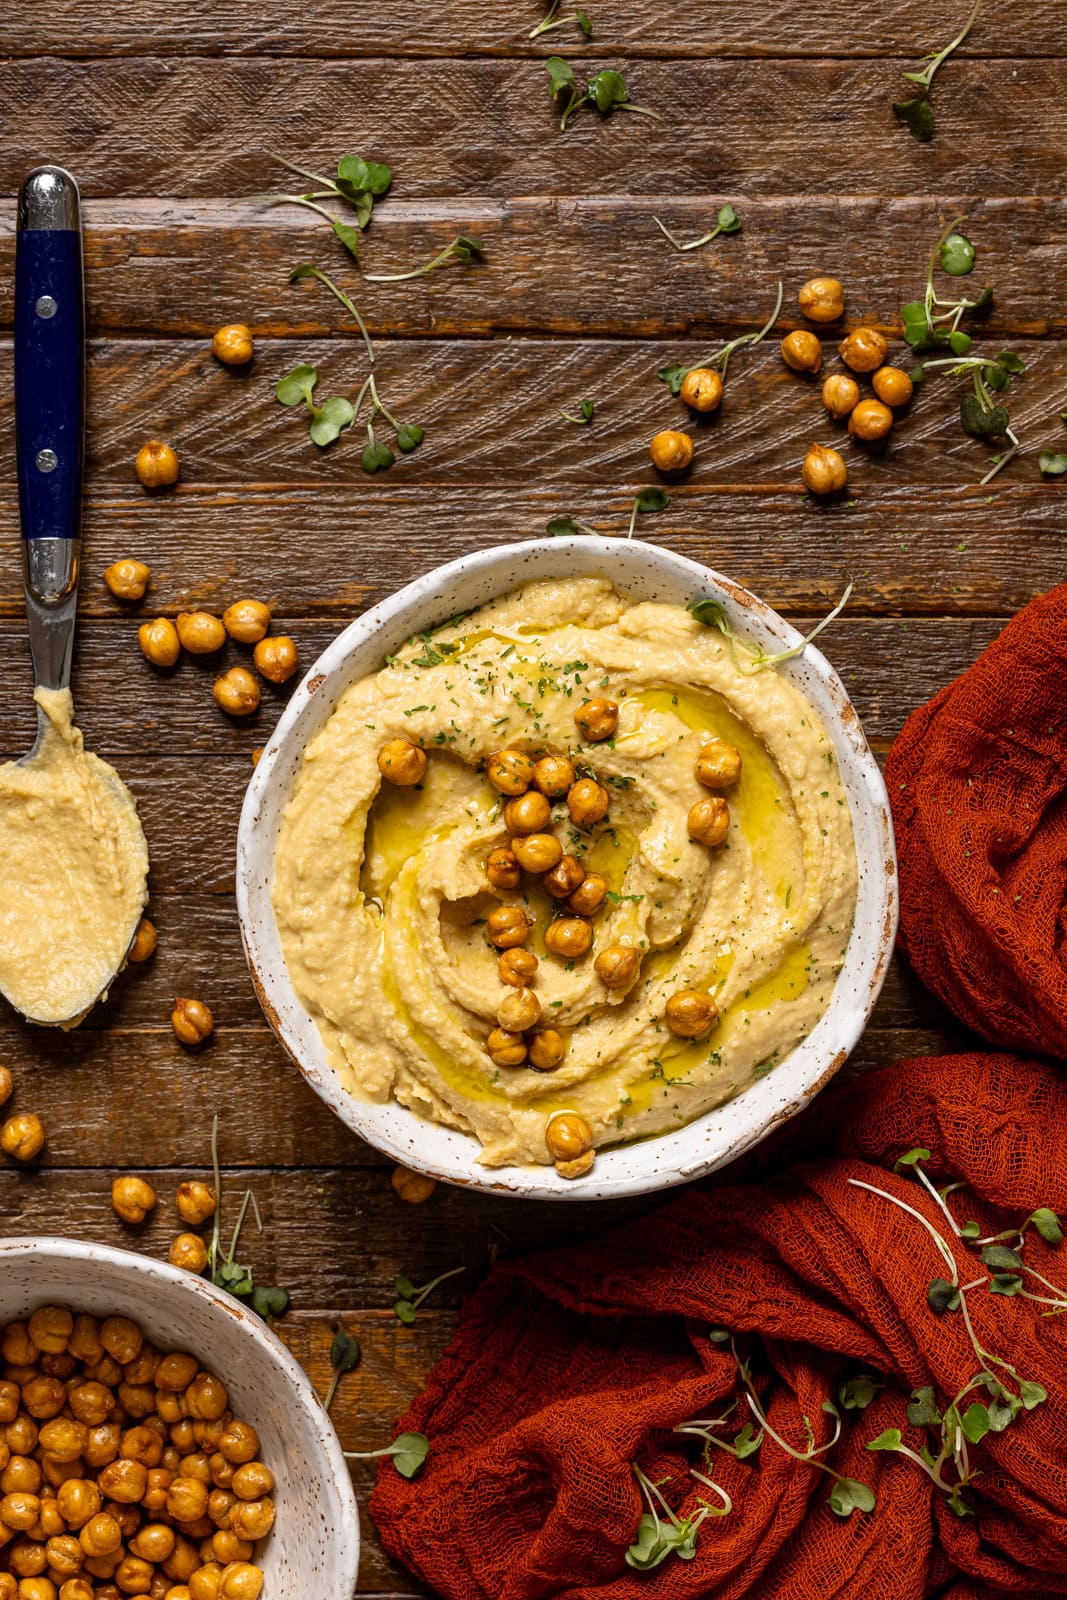 Bowl of hummus with a spoon and chickpeas.